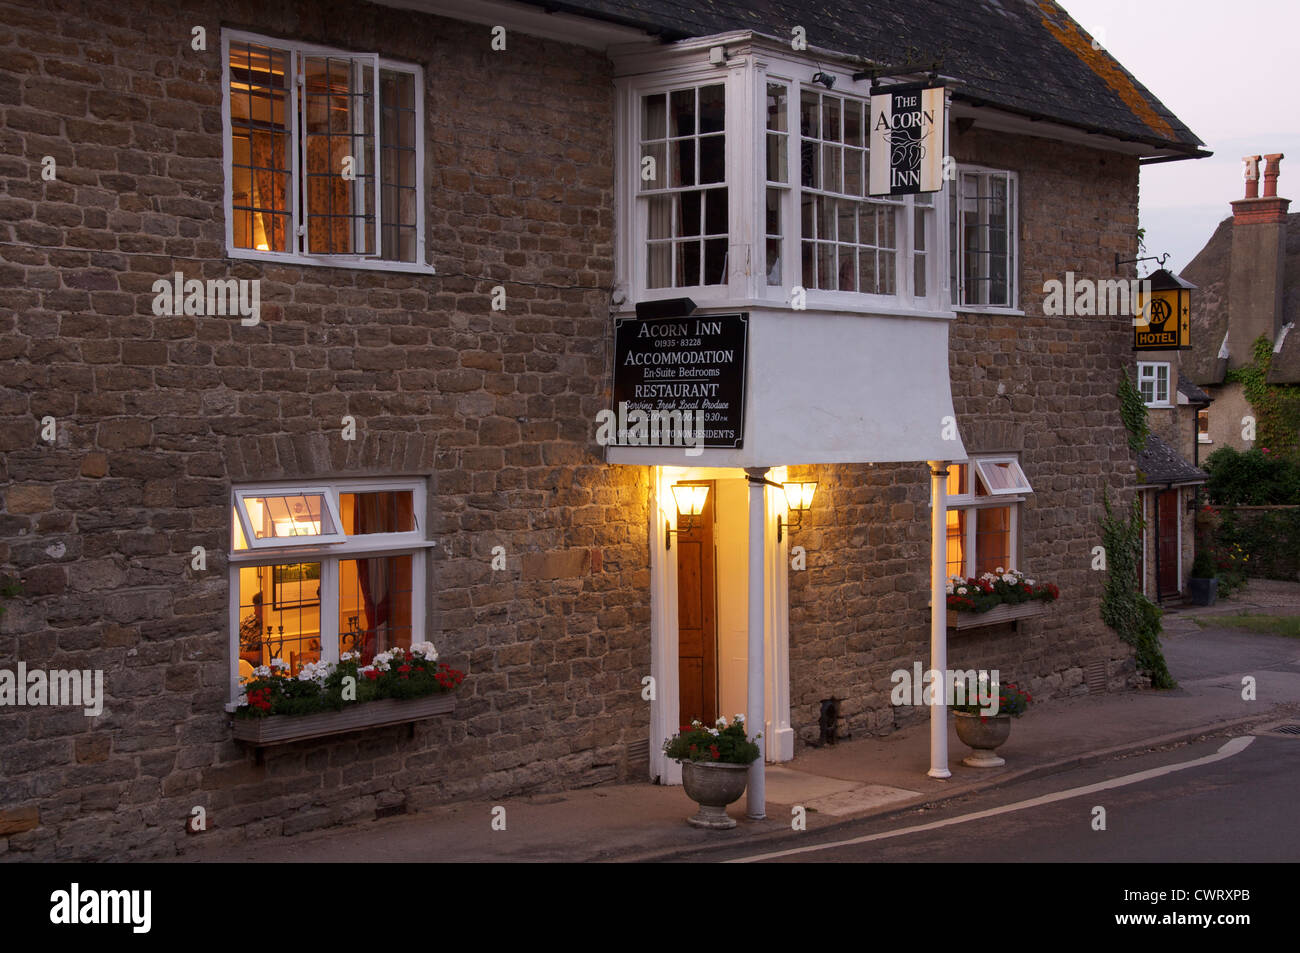 English pubs. The Acorn Inn, in the Dorset village of Evershot. A village pub, hotel and restaurant, its friendly lights glow in the evening. England. Stock Photo